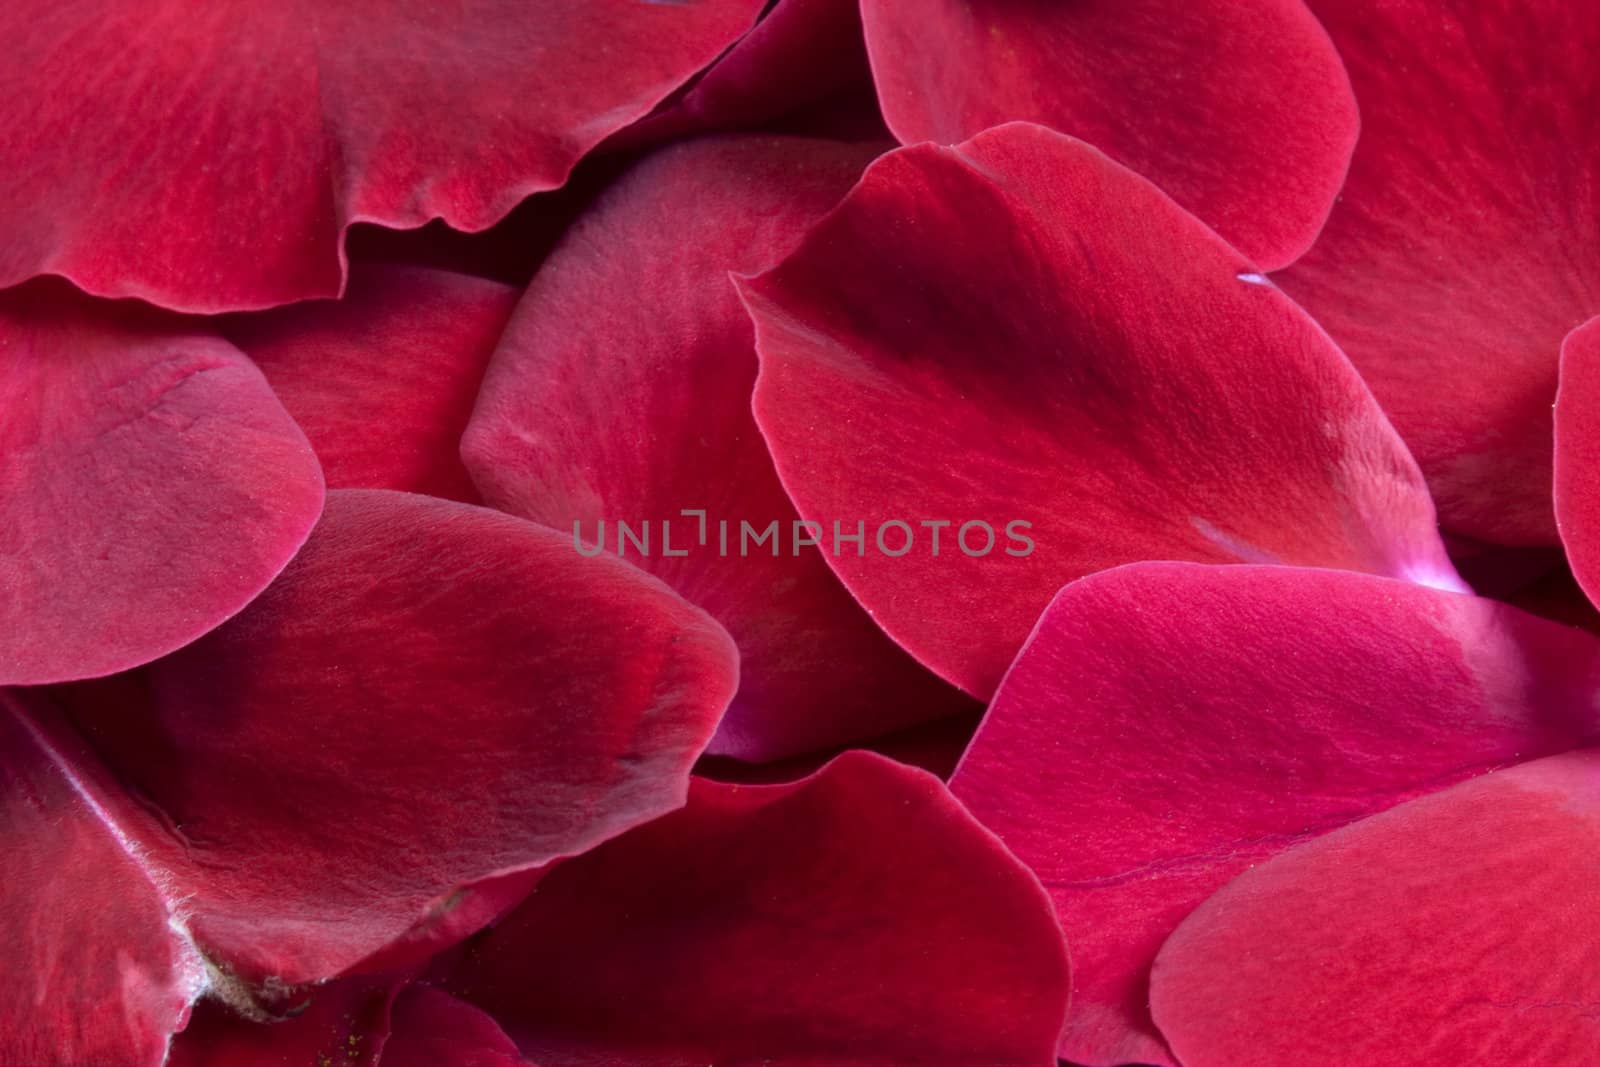 background of red and purple rose petals with a velvet surface